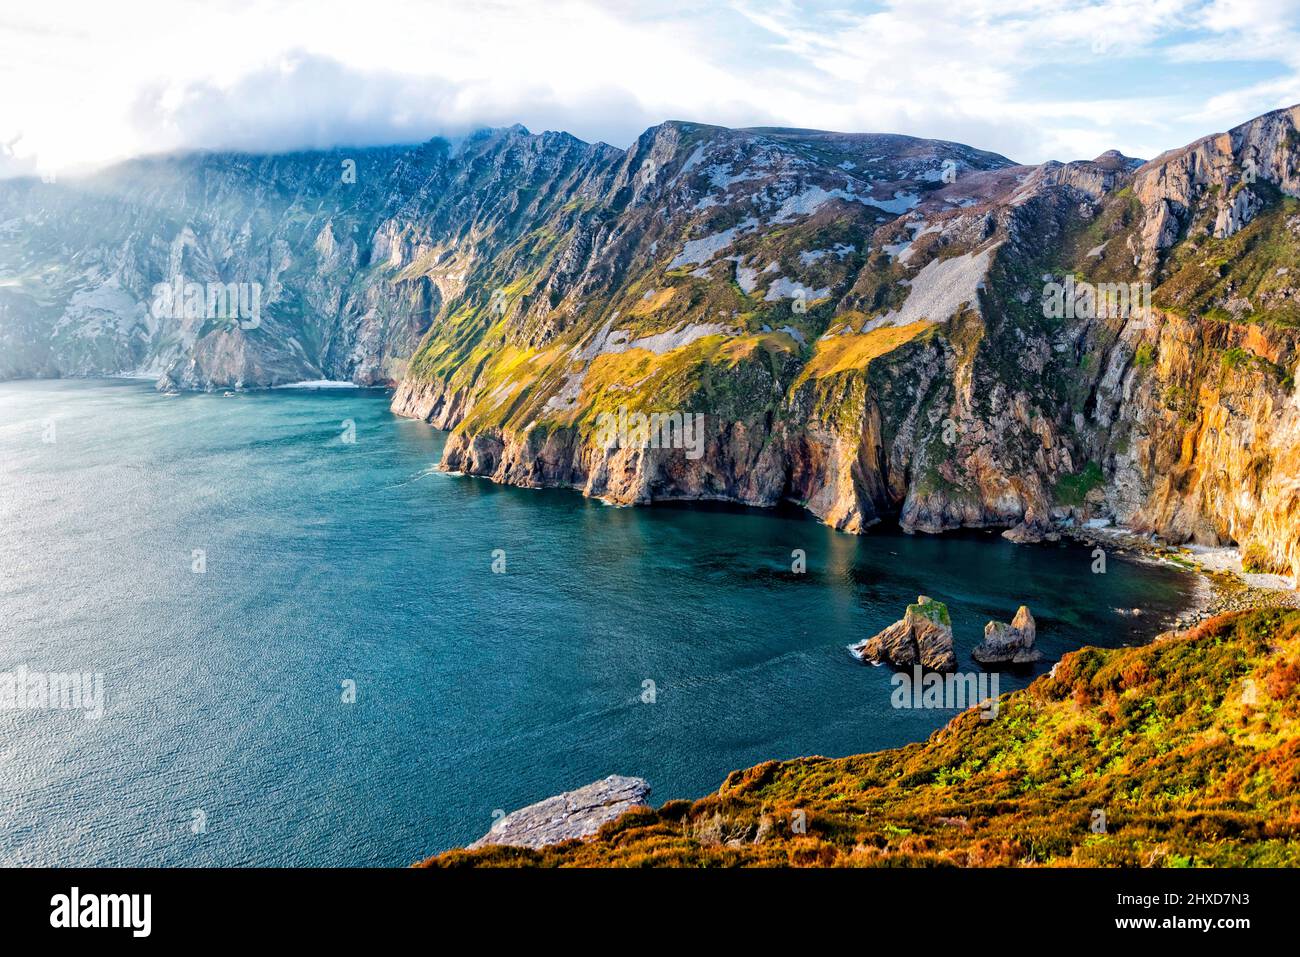 Cliffs, Slieve League, County Donegal, Ireland Stock Photo